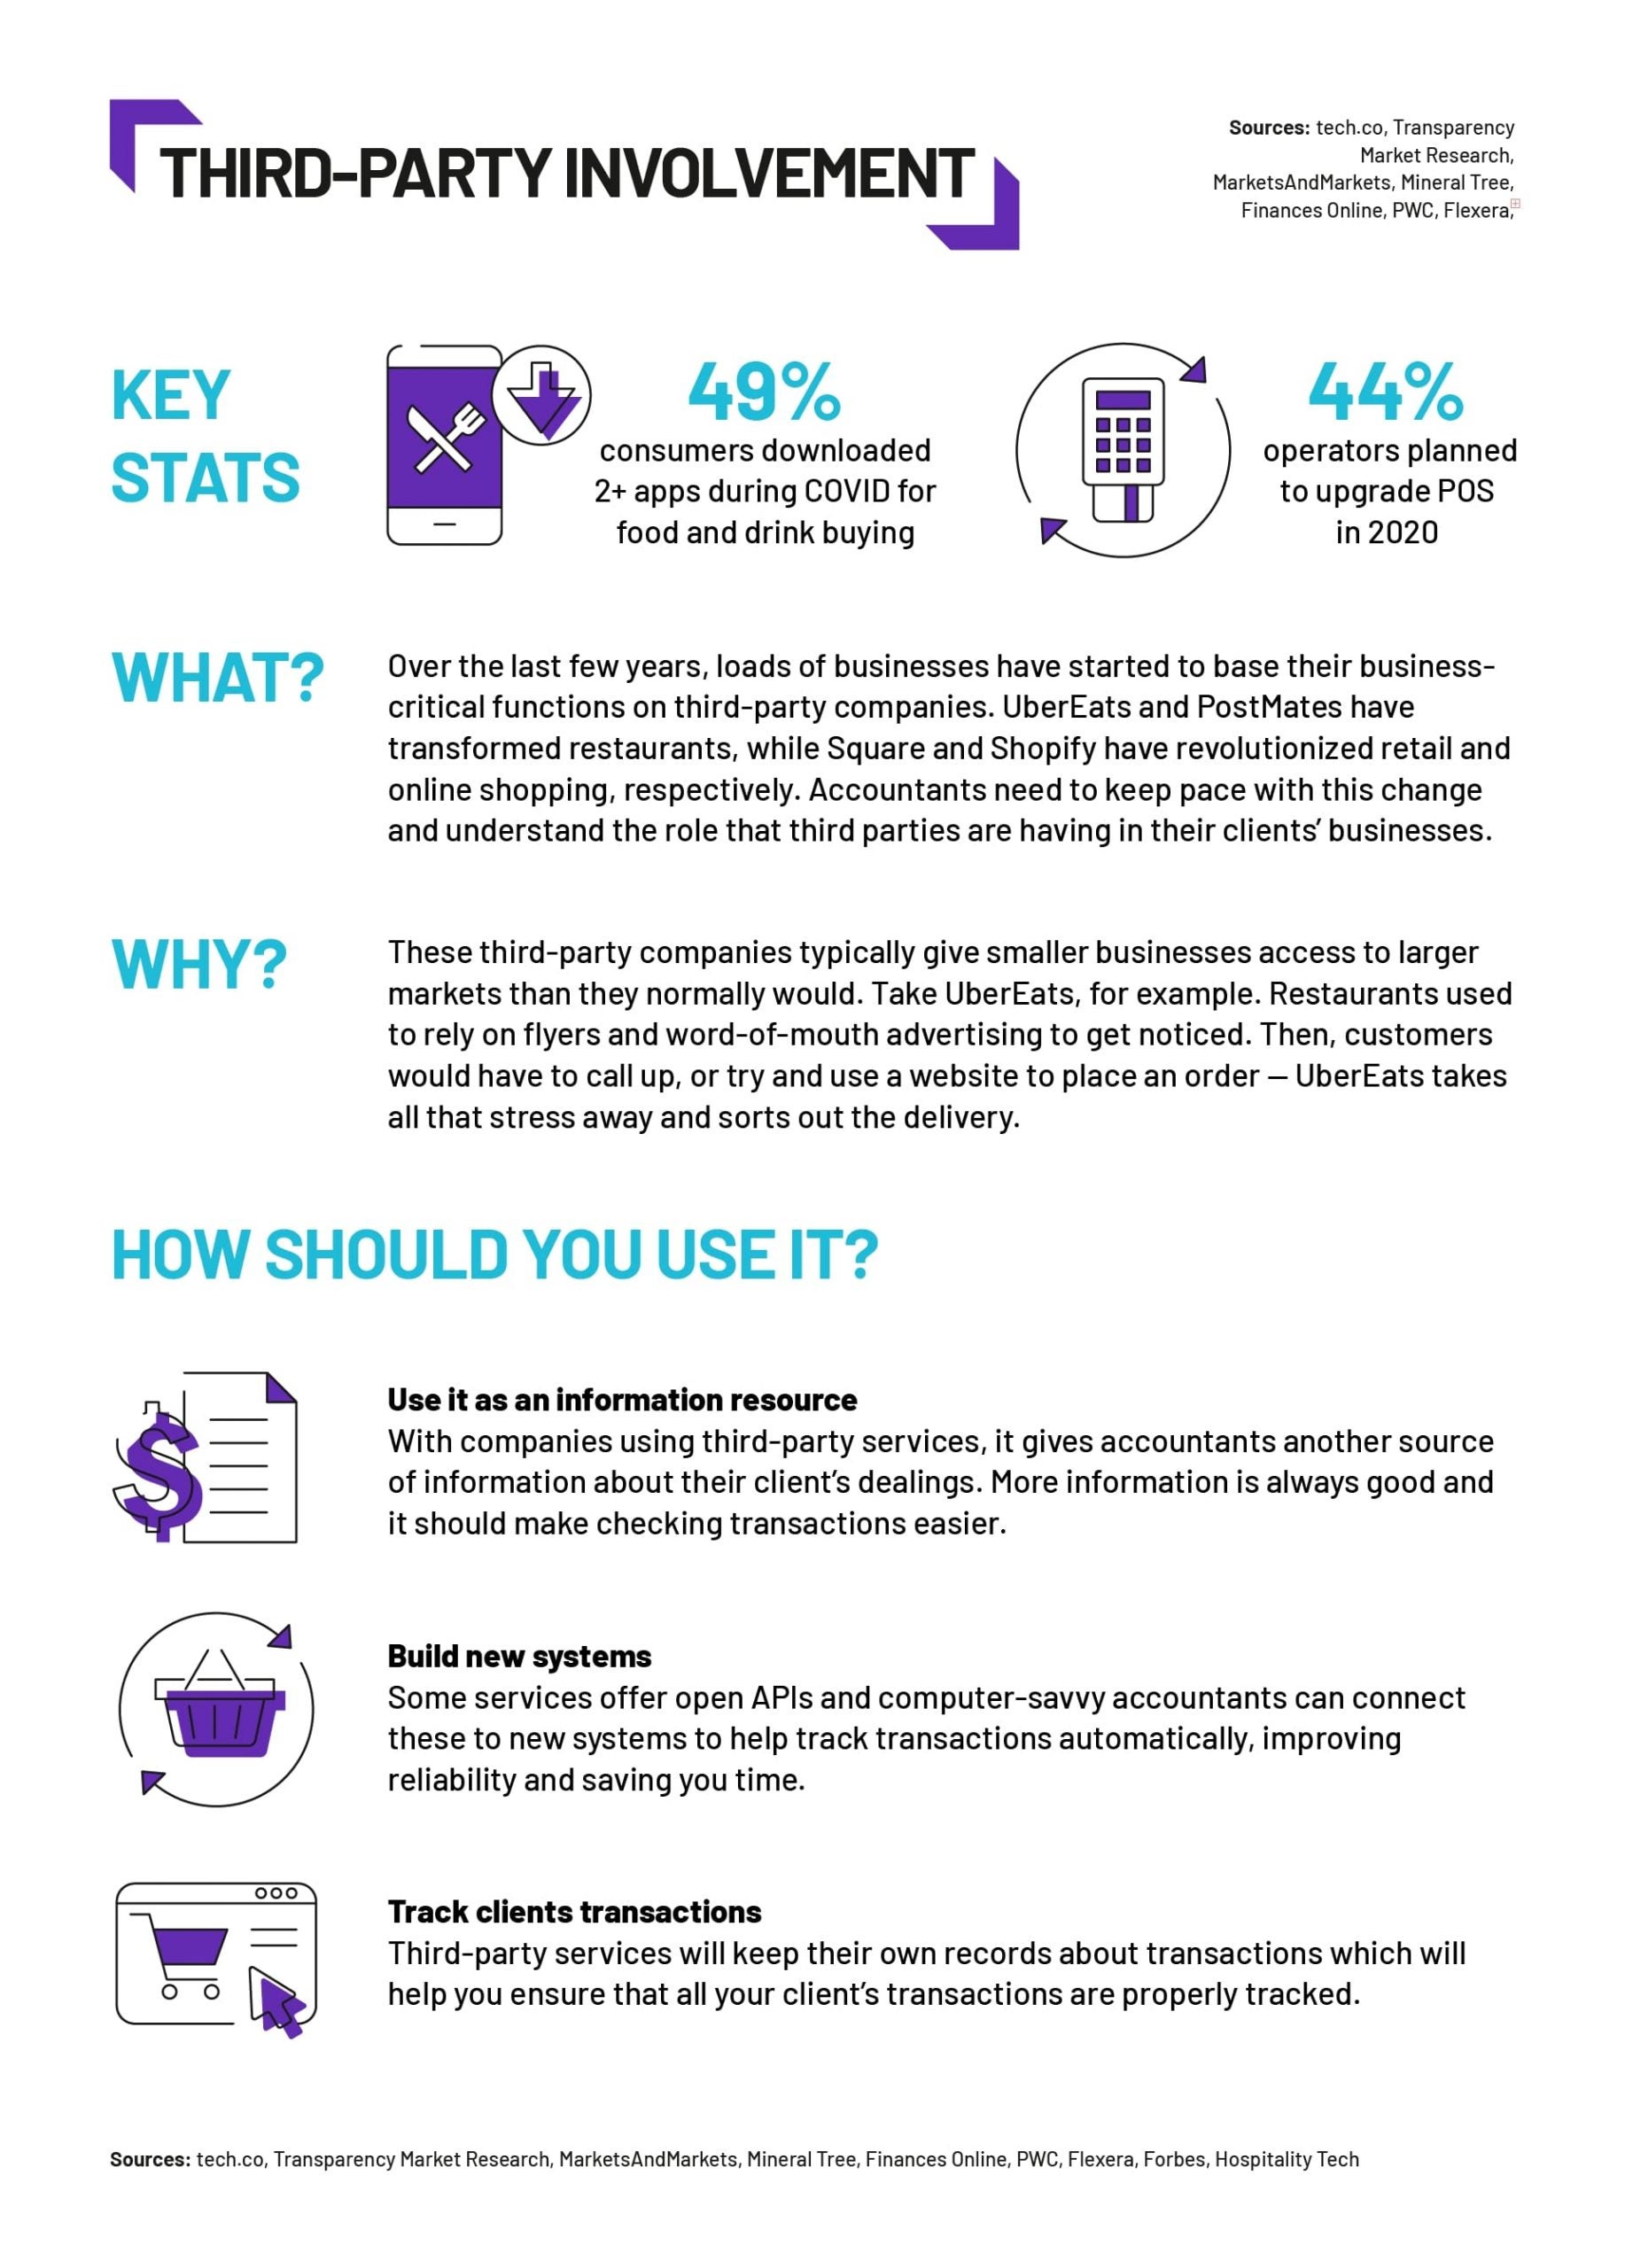 accounting trend - third party involvement - tech.co infographic